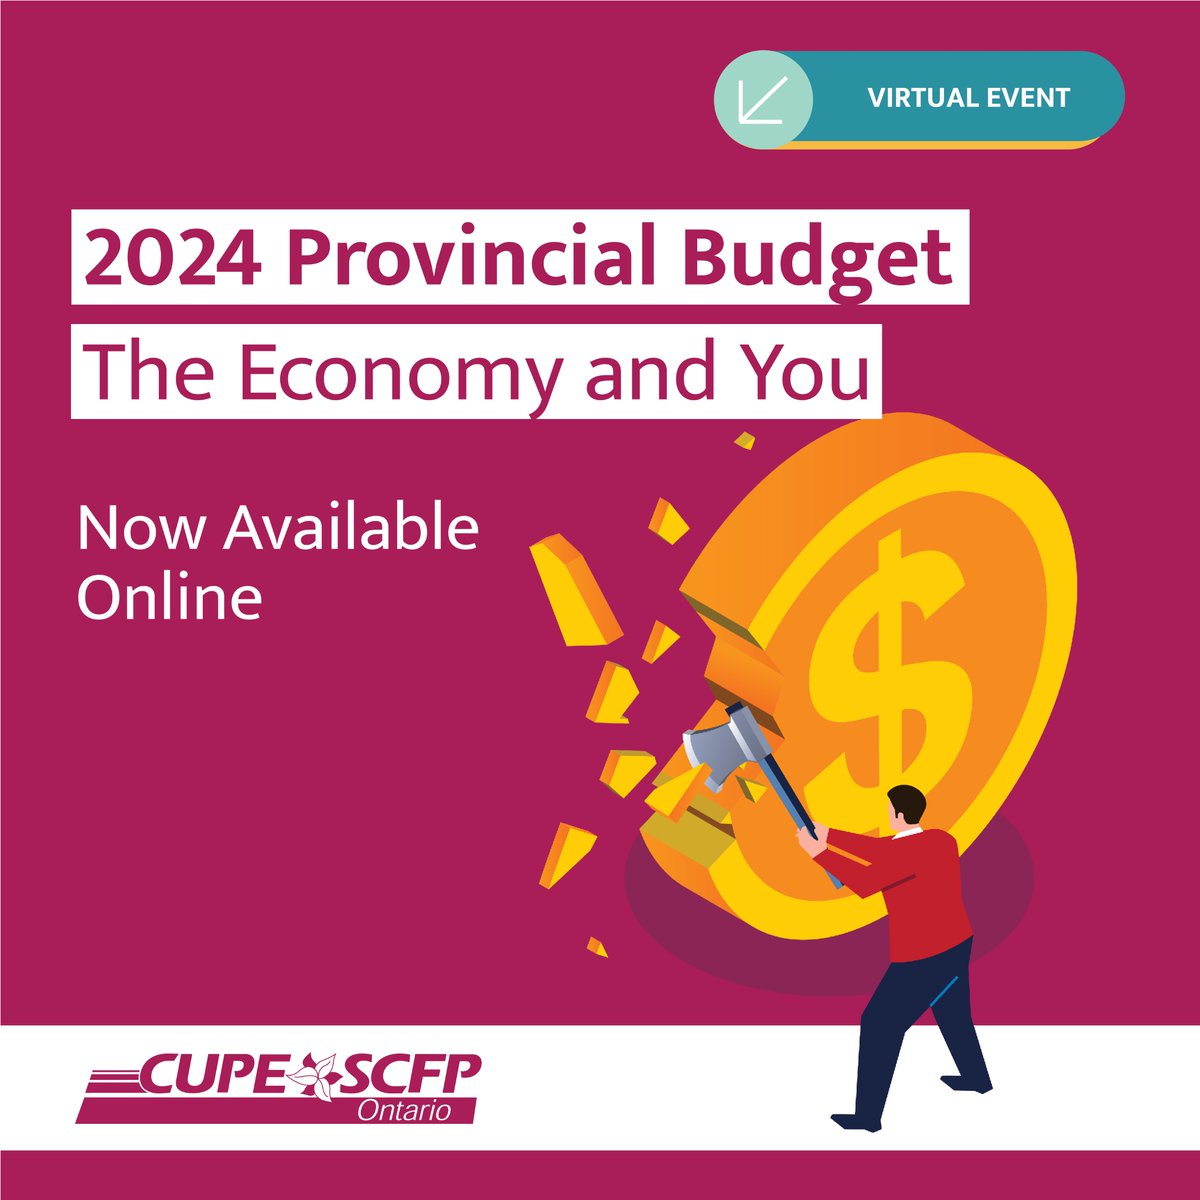 Are you wondering how the provincial 2024 budget affects you? Us too! That's why we hosted a financial literacy webinar to break down the 2024 budget in a way that matters to YOU, YOUR LOCAL, AND YOUR MEMBERS. You can find the webinar online and slides linked below to dig…